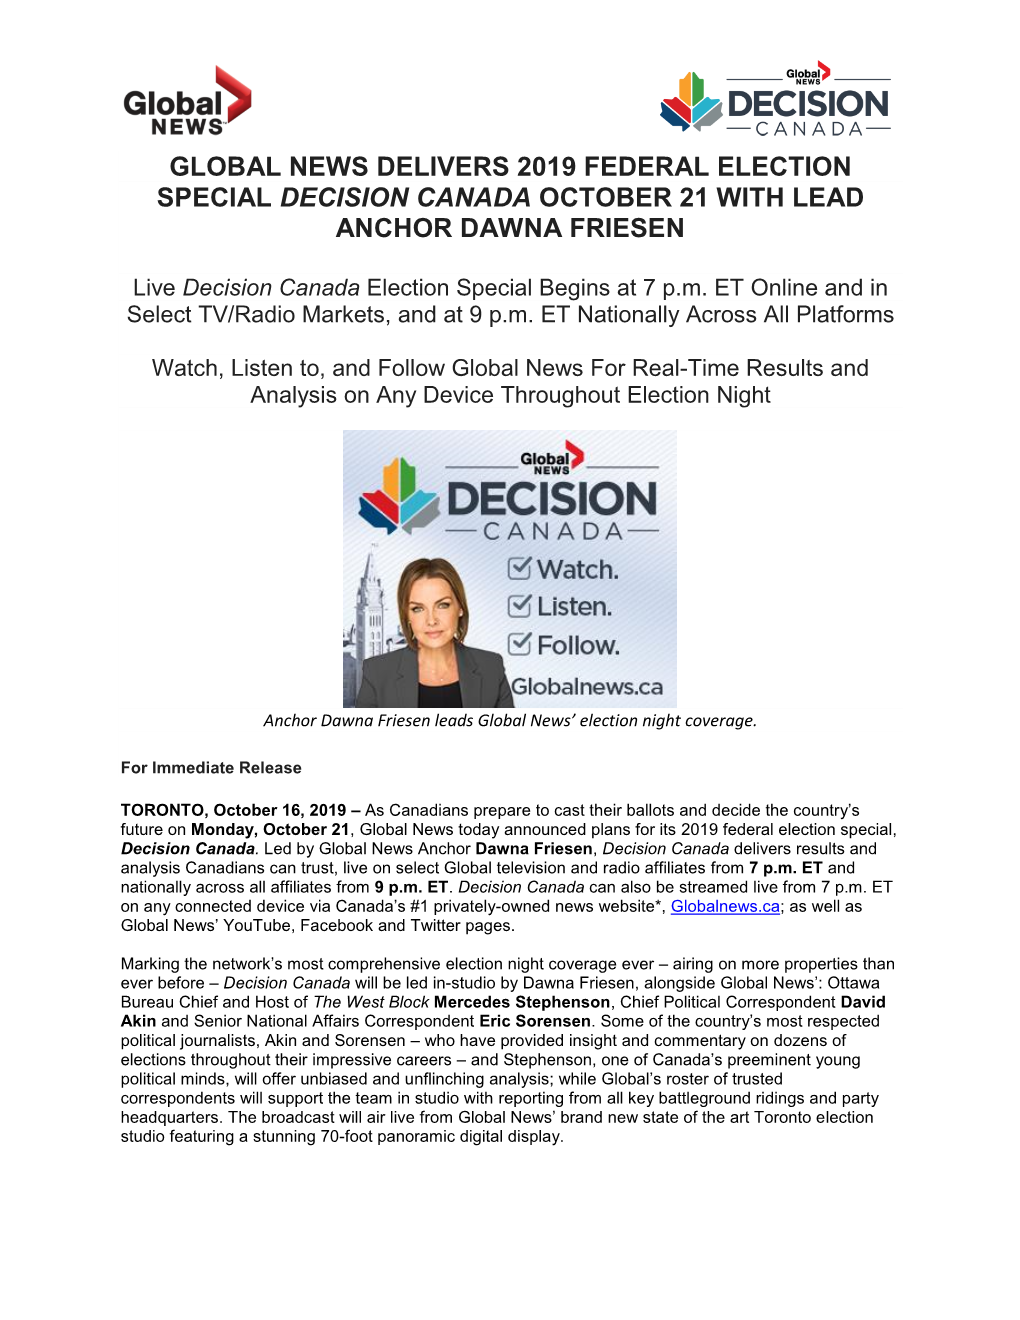 2019 Federal Election Special Decision Canada October 21 with Lead Anchor Dawna Friesen